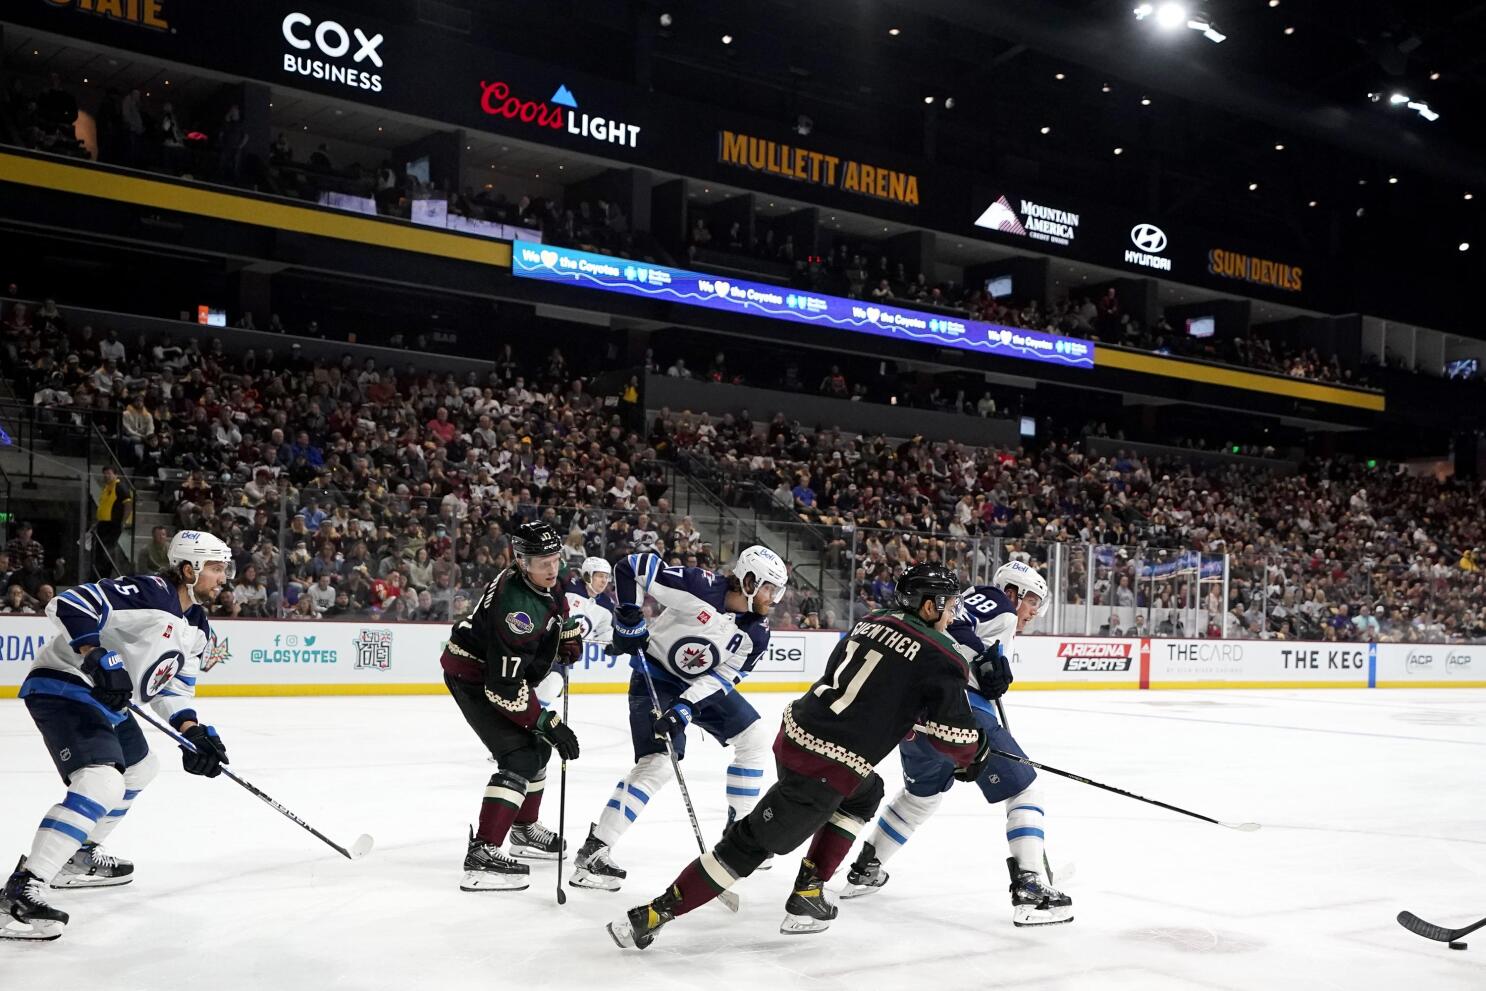 Mullett Arena a success for Arizona Coyotes on 1st night despite defeat